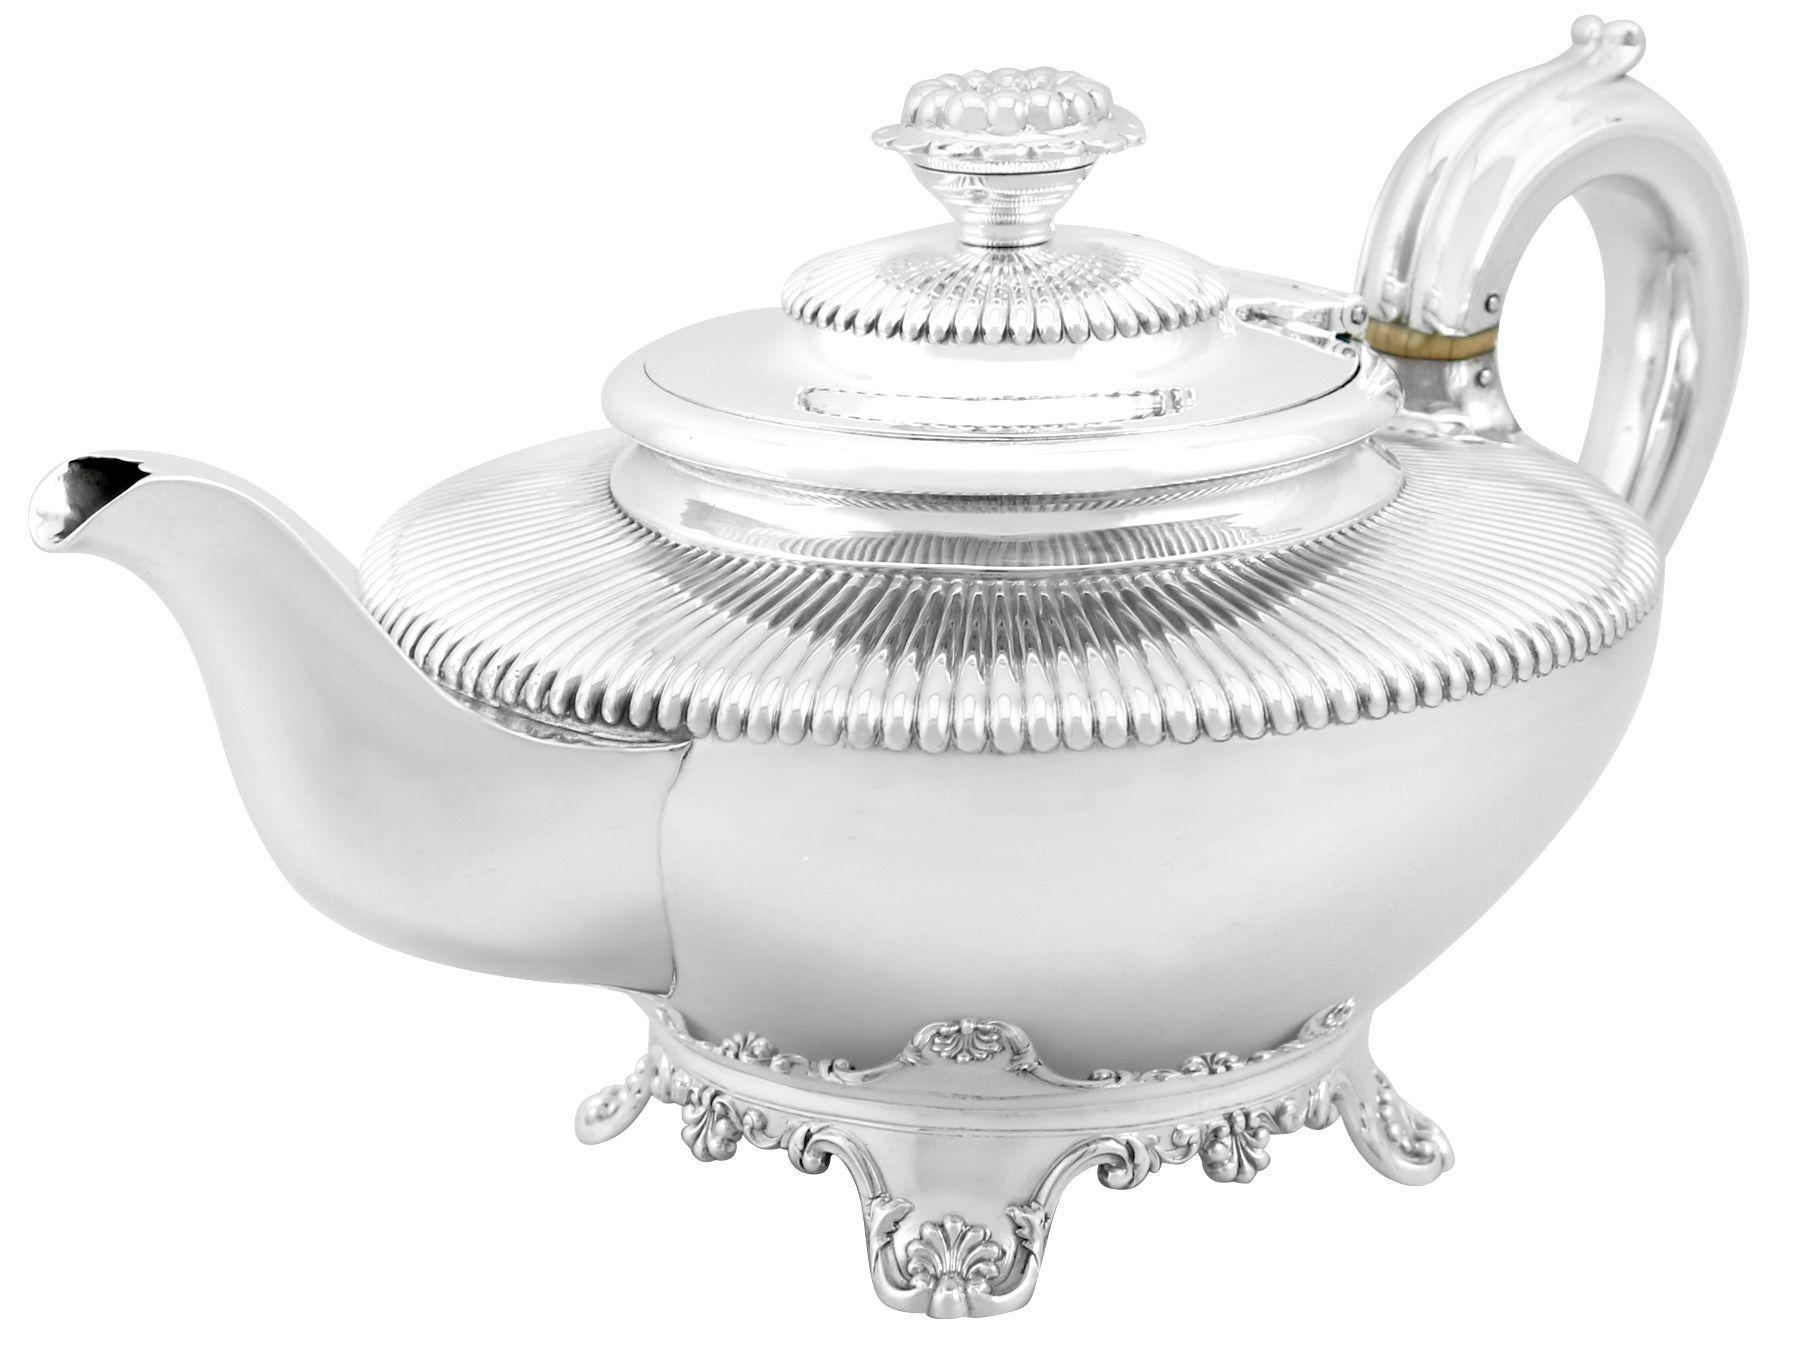 1830s English Sterling Silver Teapot In Excellent Condition For Sale In Jesmond, Newcastle Upon Tyne